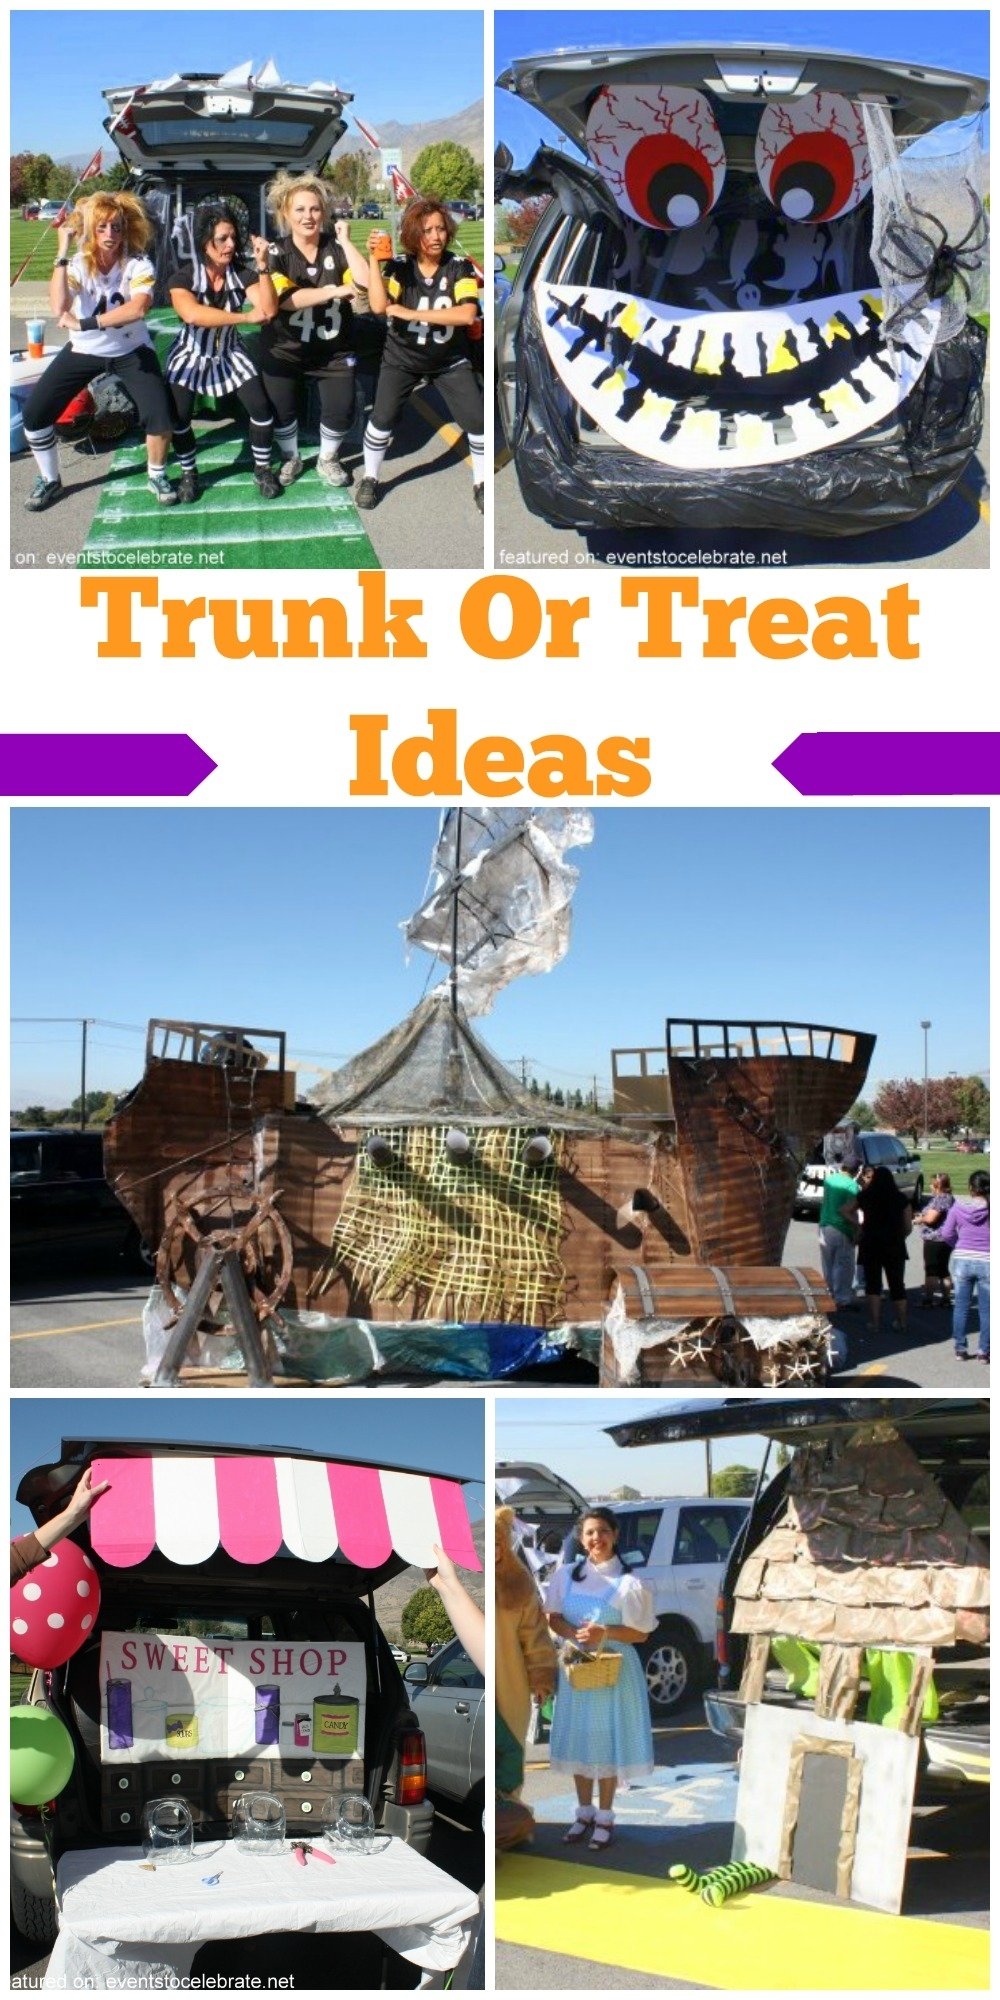 10 Ideal Ideas For Trunk Or Treat trunk or treat ideas events to celebrate 2023